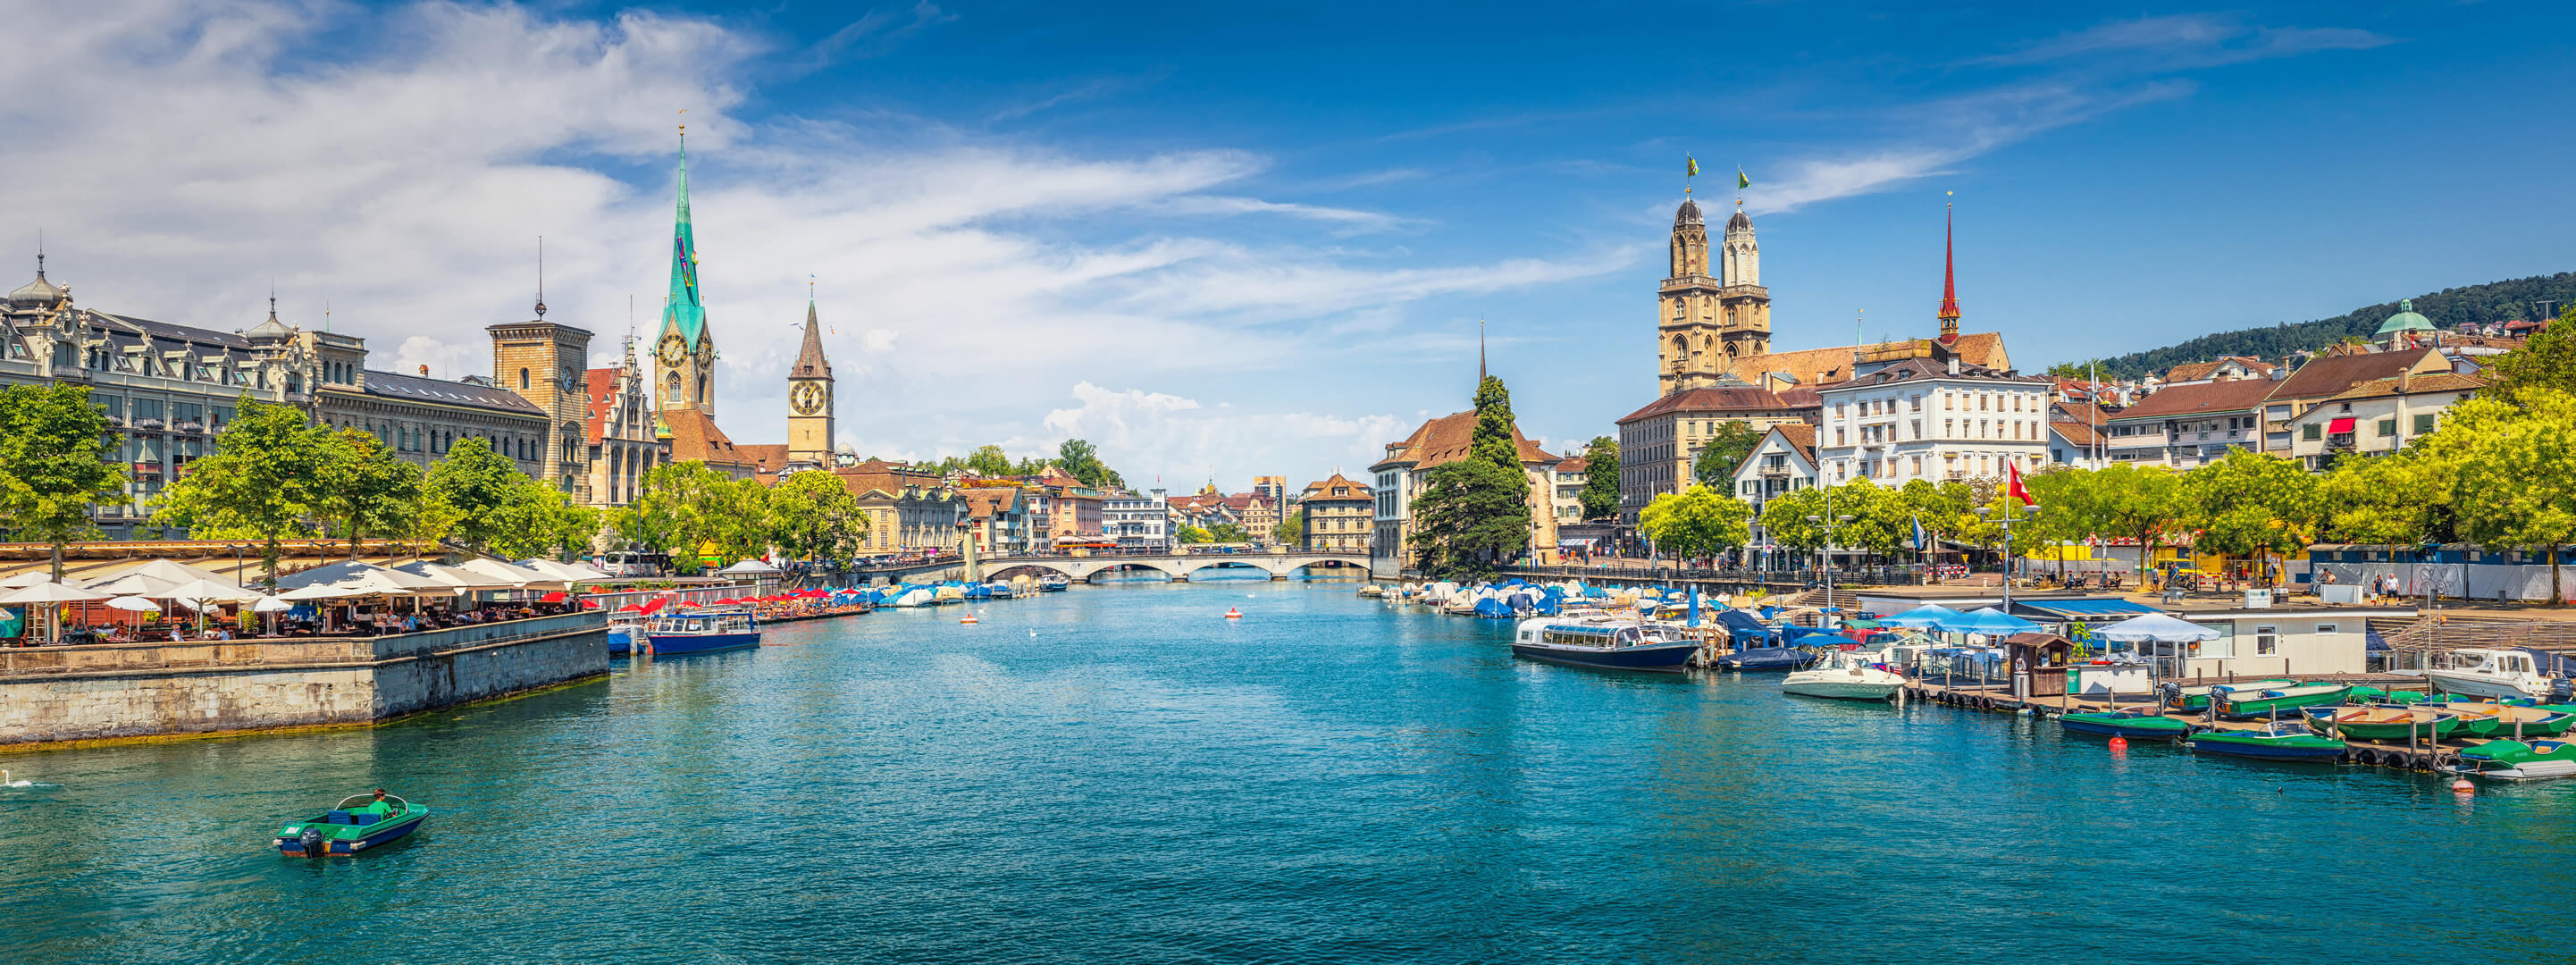 St. Peter and river Limmat at Lake Zurich